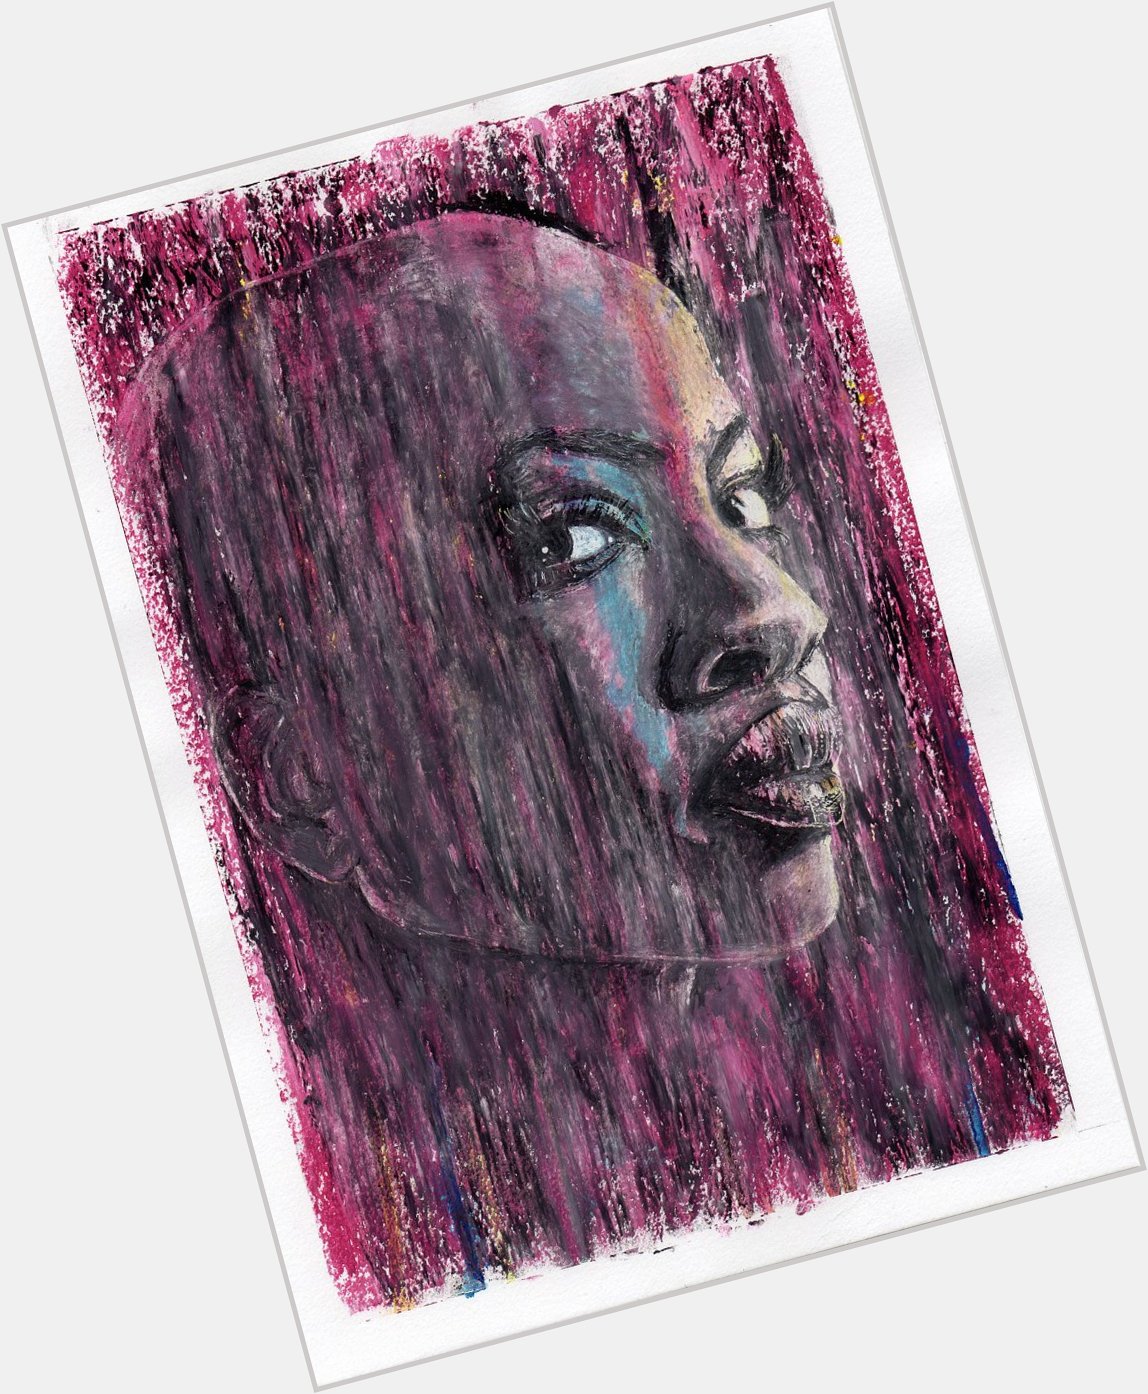 Happy birthday Danai Gurira! This picture: oil and ink on acrylic paper, 21cm x 30cm. 